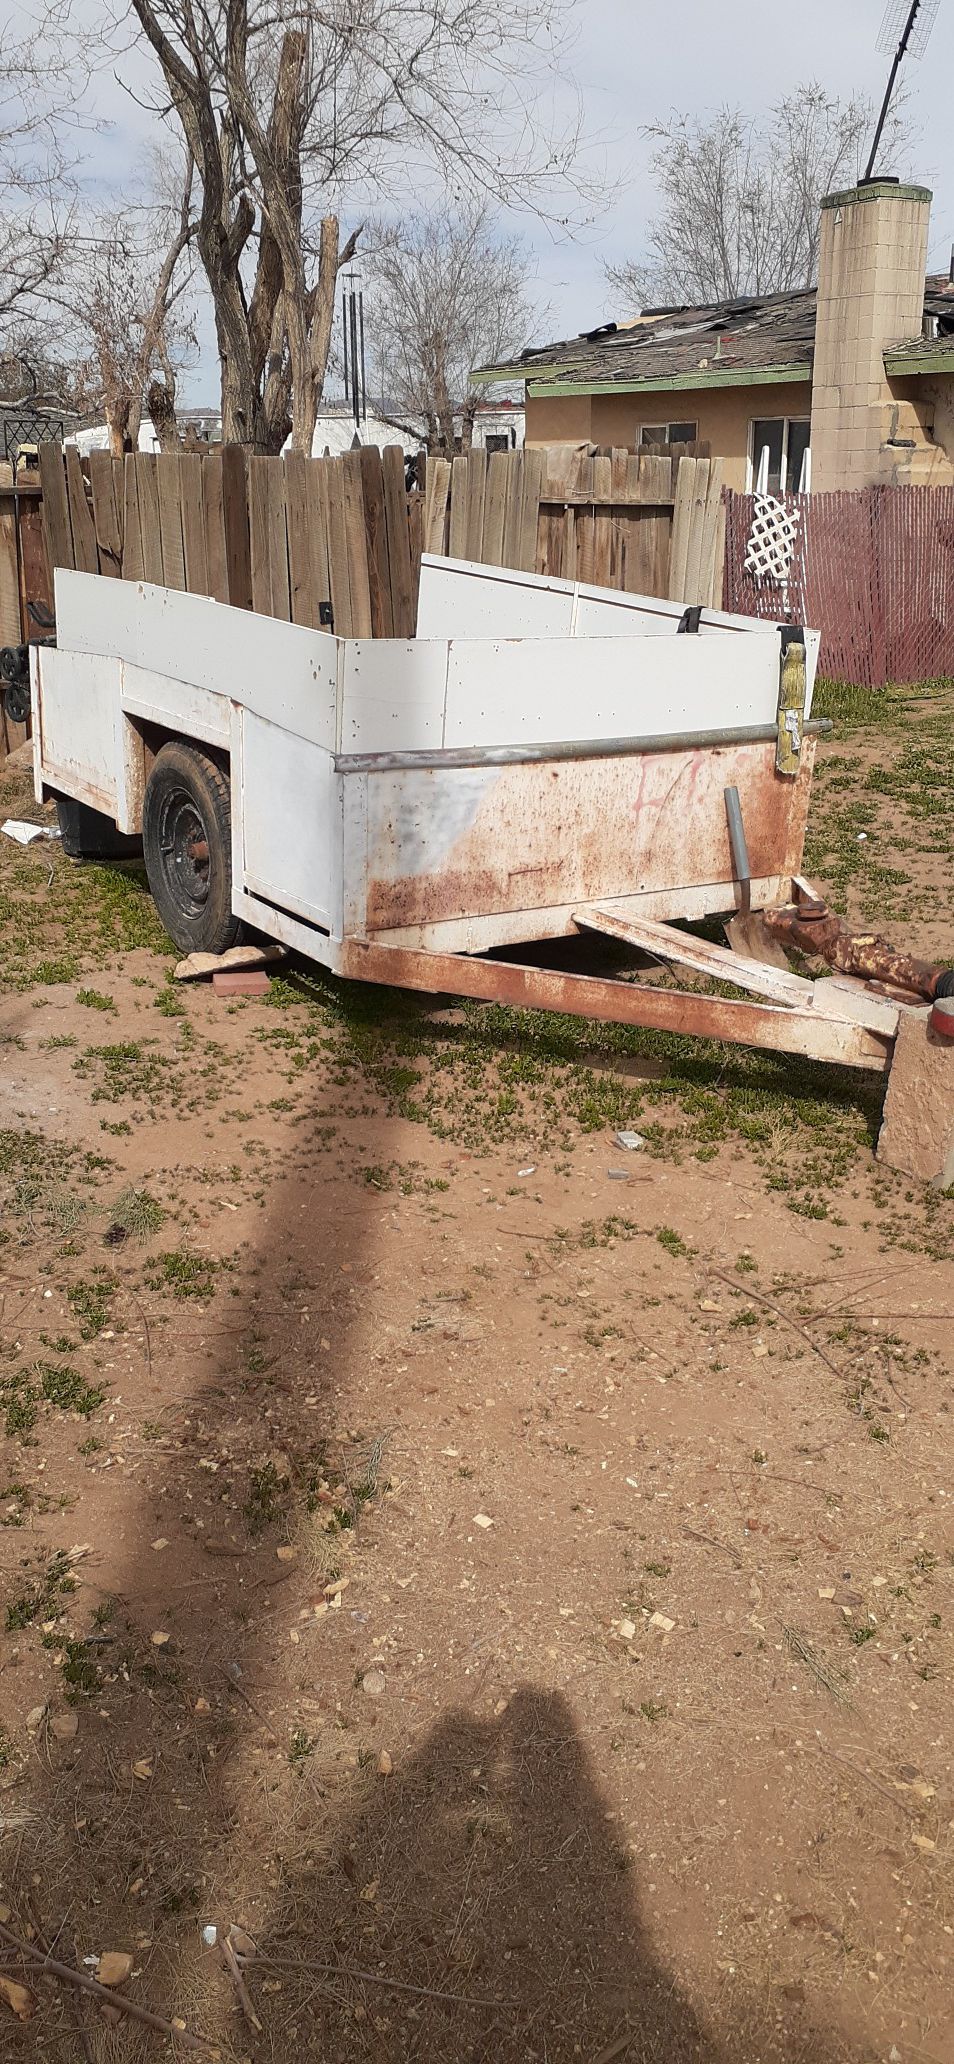 Trailer heavy axle turn RV very heavy very strong with weighted tires